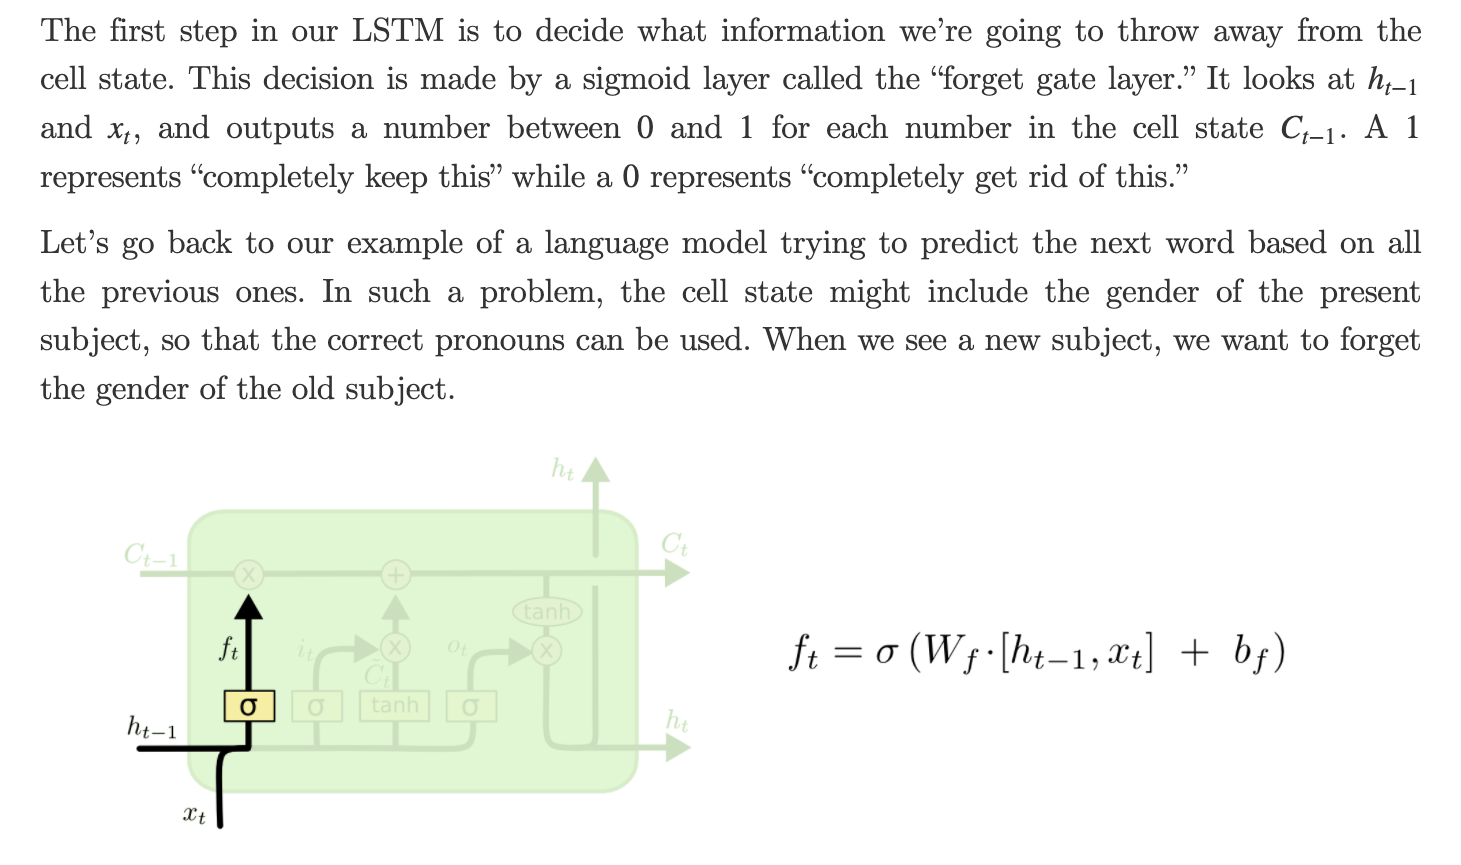 ../../_images/LSTM_forget_gate.png